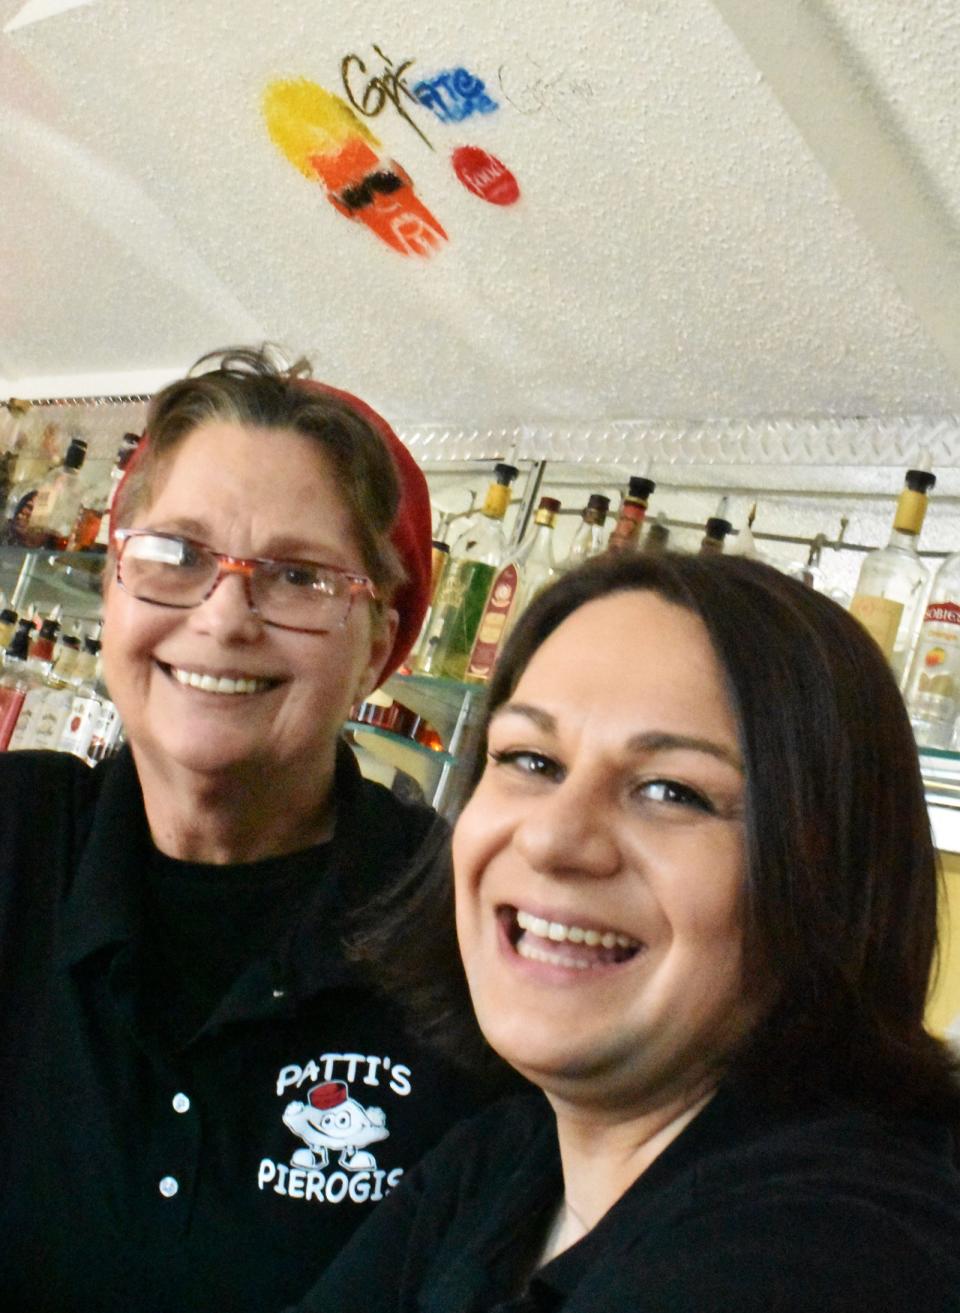 Patti Geary, owner of Patti's Pierogis at 1019 S Main St, Fall River, and Irina Sapzhnikova, server/bartender at the longtime Fall River staple for Polish food.